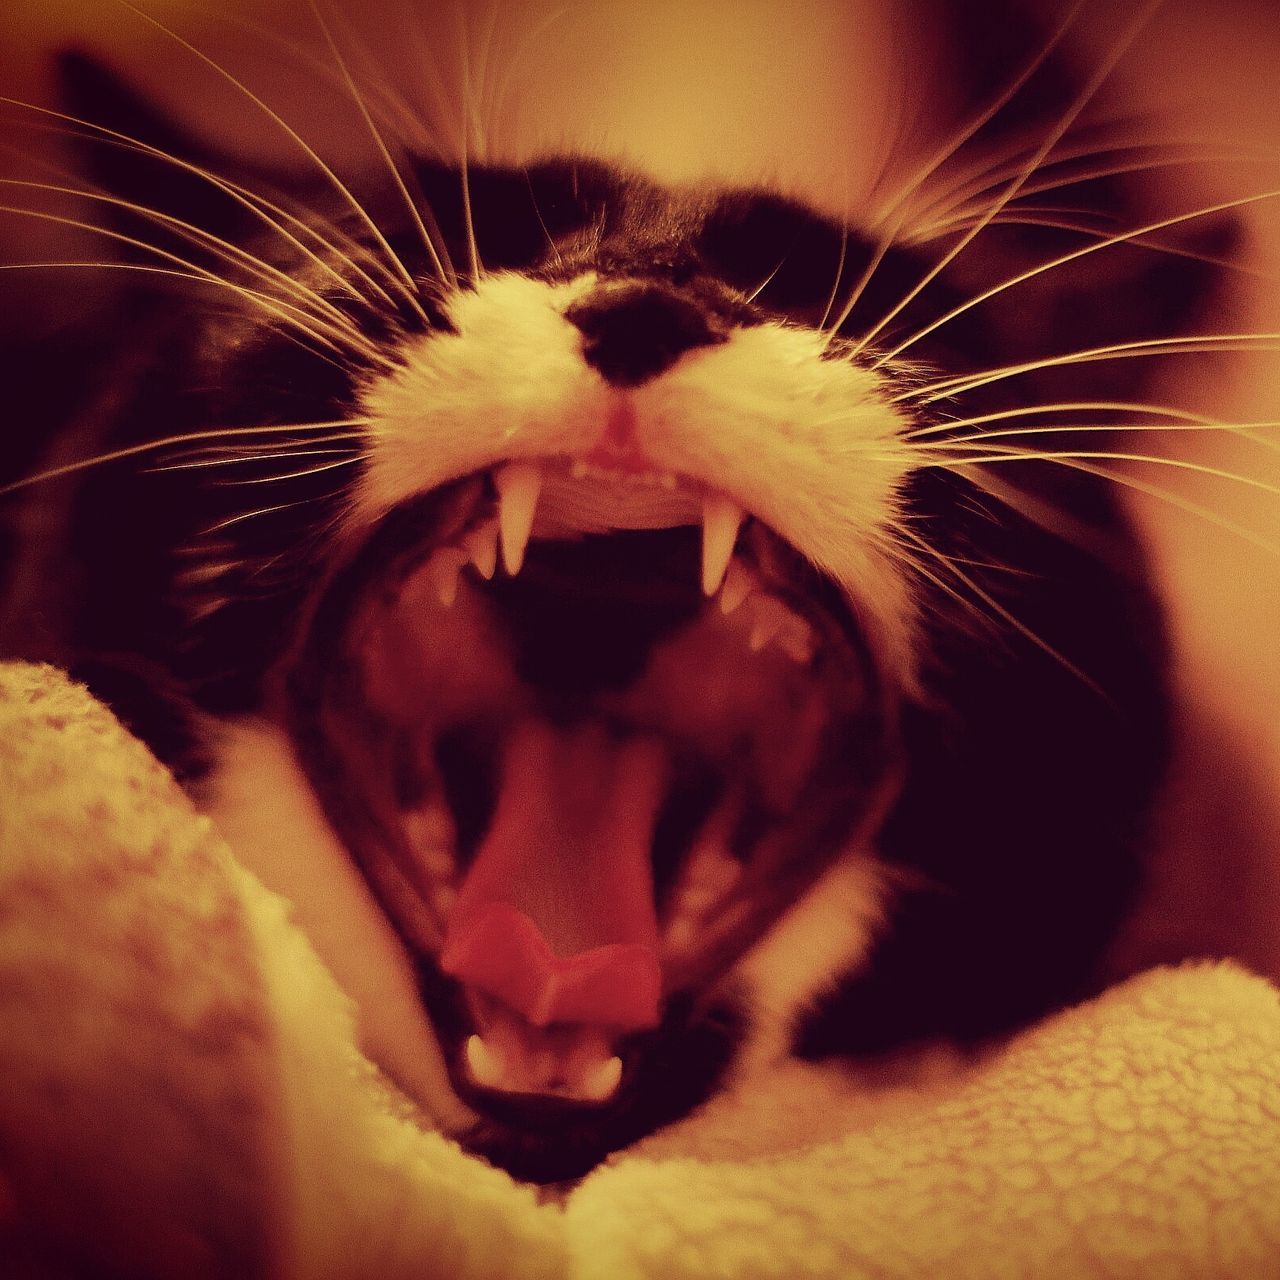 one animal, animal themes, animal, cat, domestic, pets, domestic animals, feline, mammal, mouth open, domestic cat, close-up, mouth, animal body part, vertebrate, whisker, yawning, facial expression, no people, animal teeth, animal mouth, animal head, animal nose, snout